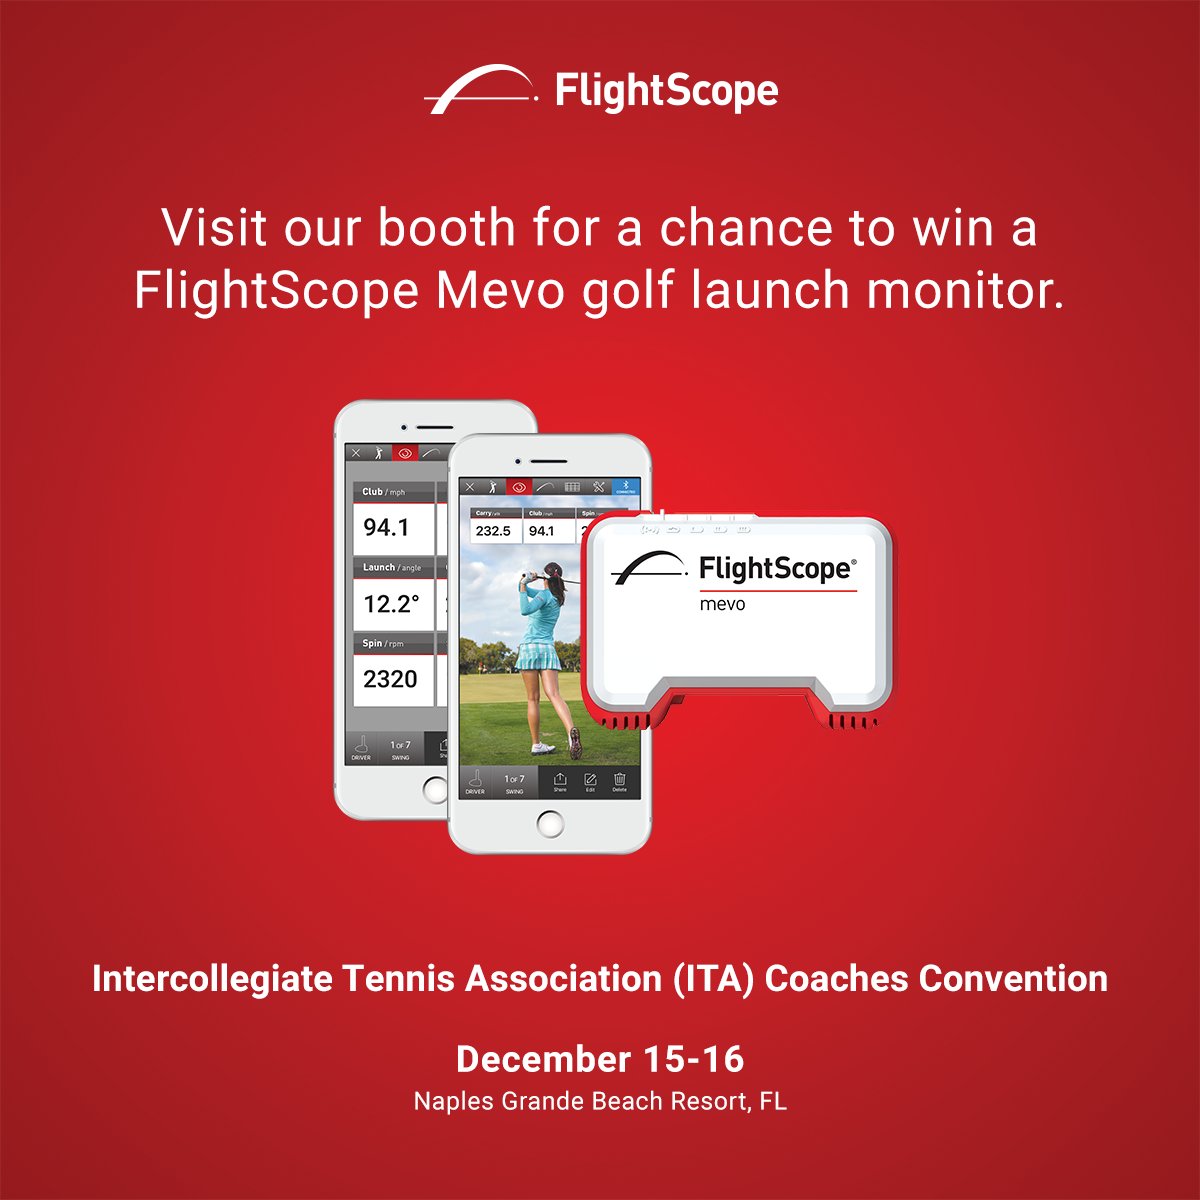 YOU could be the lucky winner of our @FlightScopeMevo giveaway! Stop by and see us at the @ITA_Tennis Convention tomorrow for a chance to win your own personal golf launch monitor. #FlightScopeNumbers